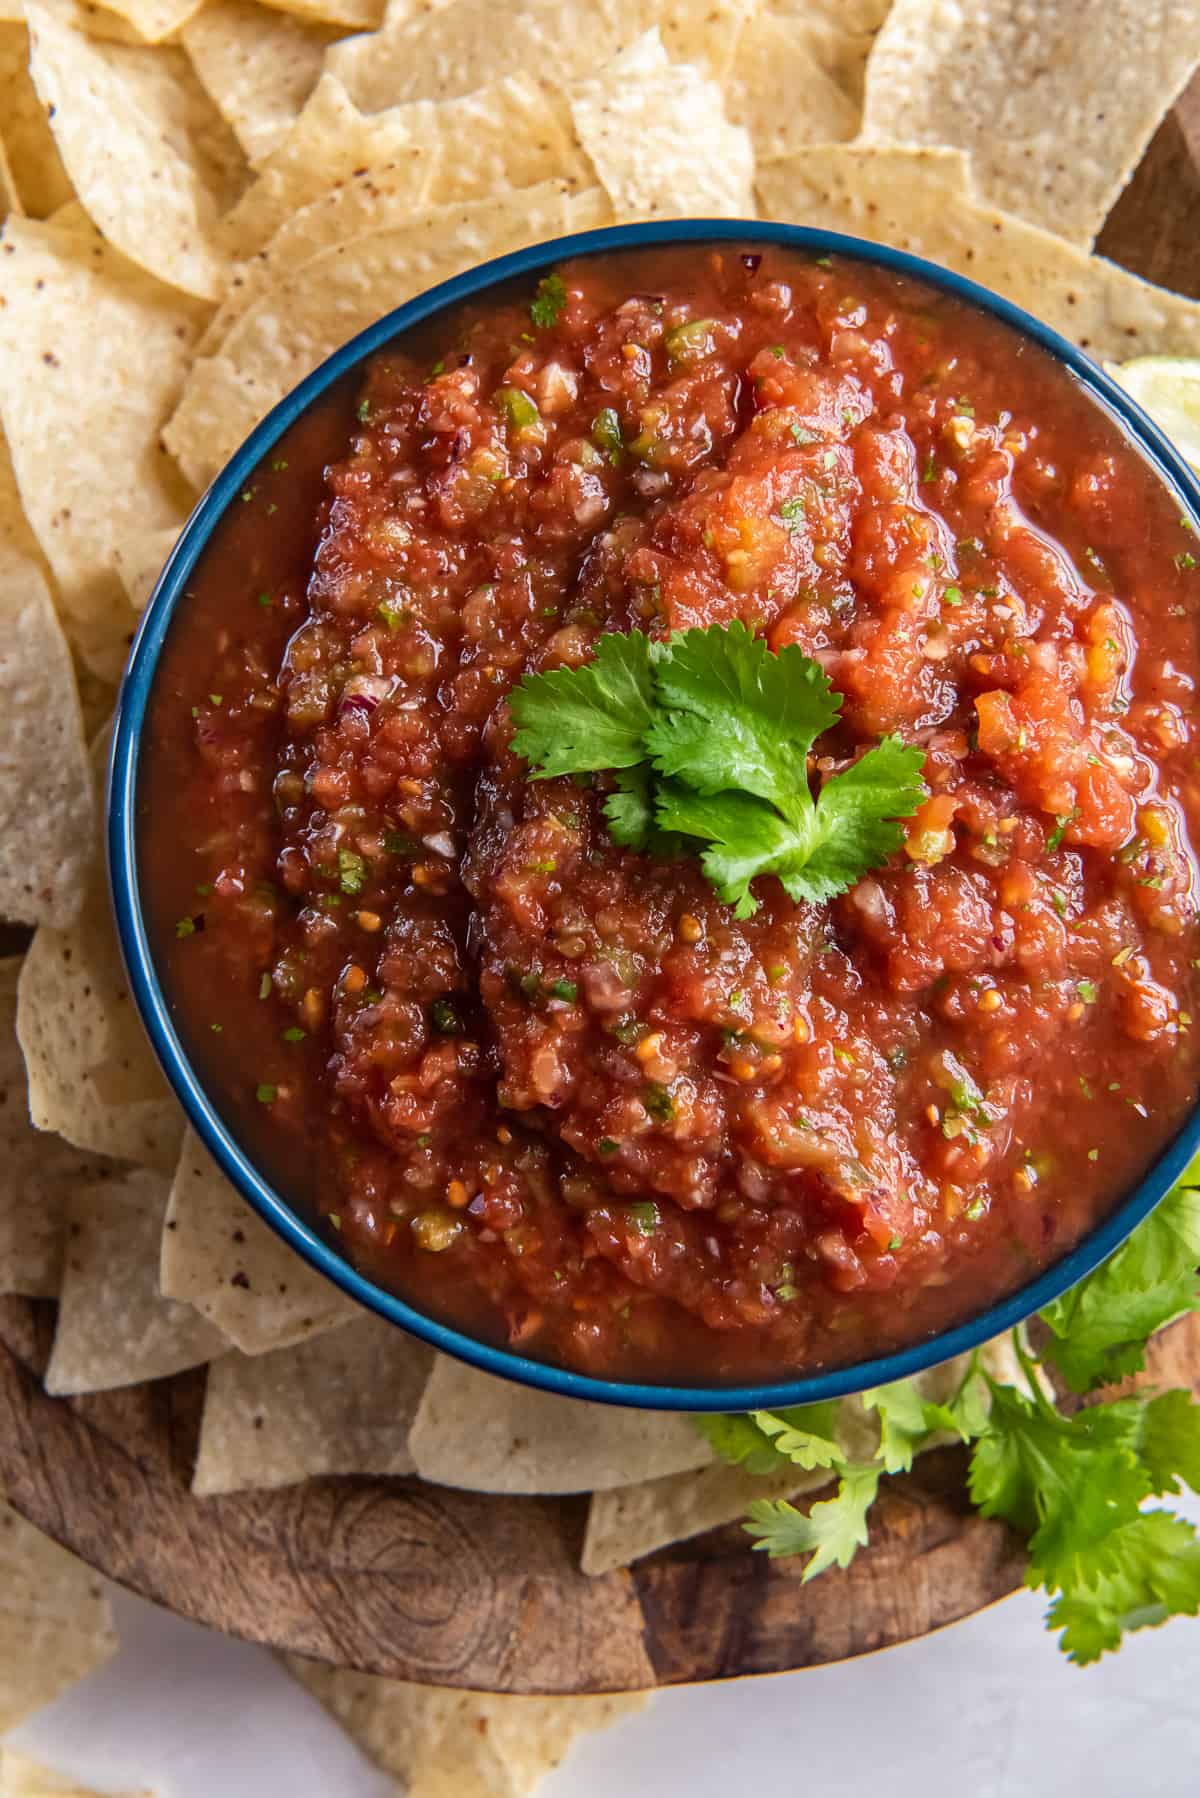 A top down shot of salsa in a bowl on a wood platter with tortilla chips.